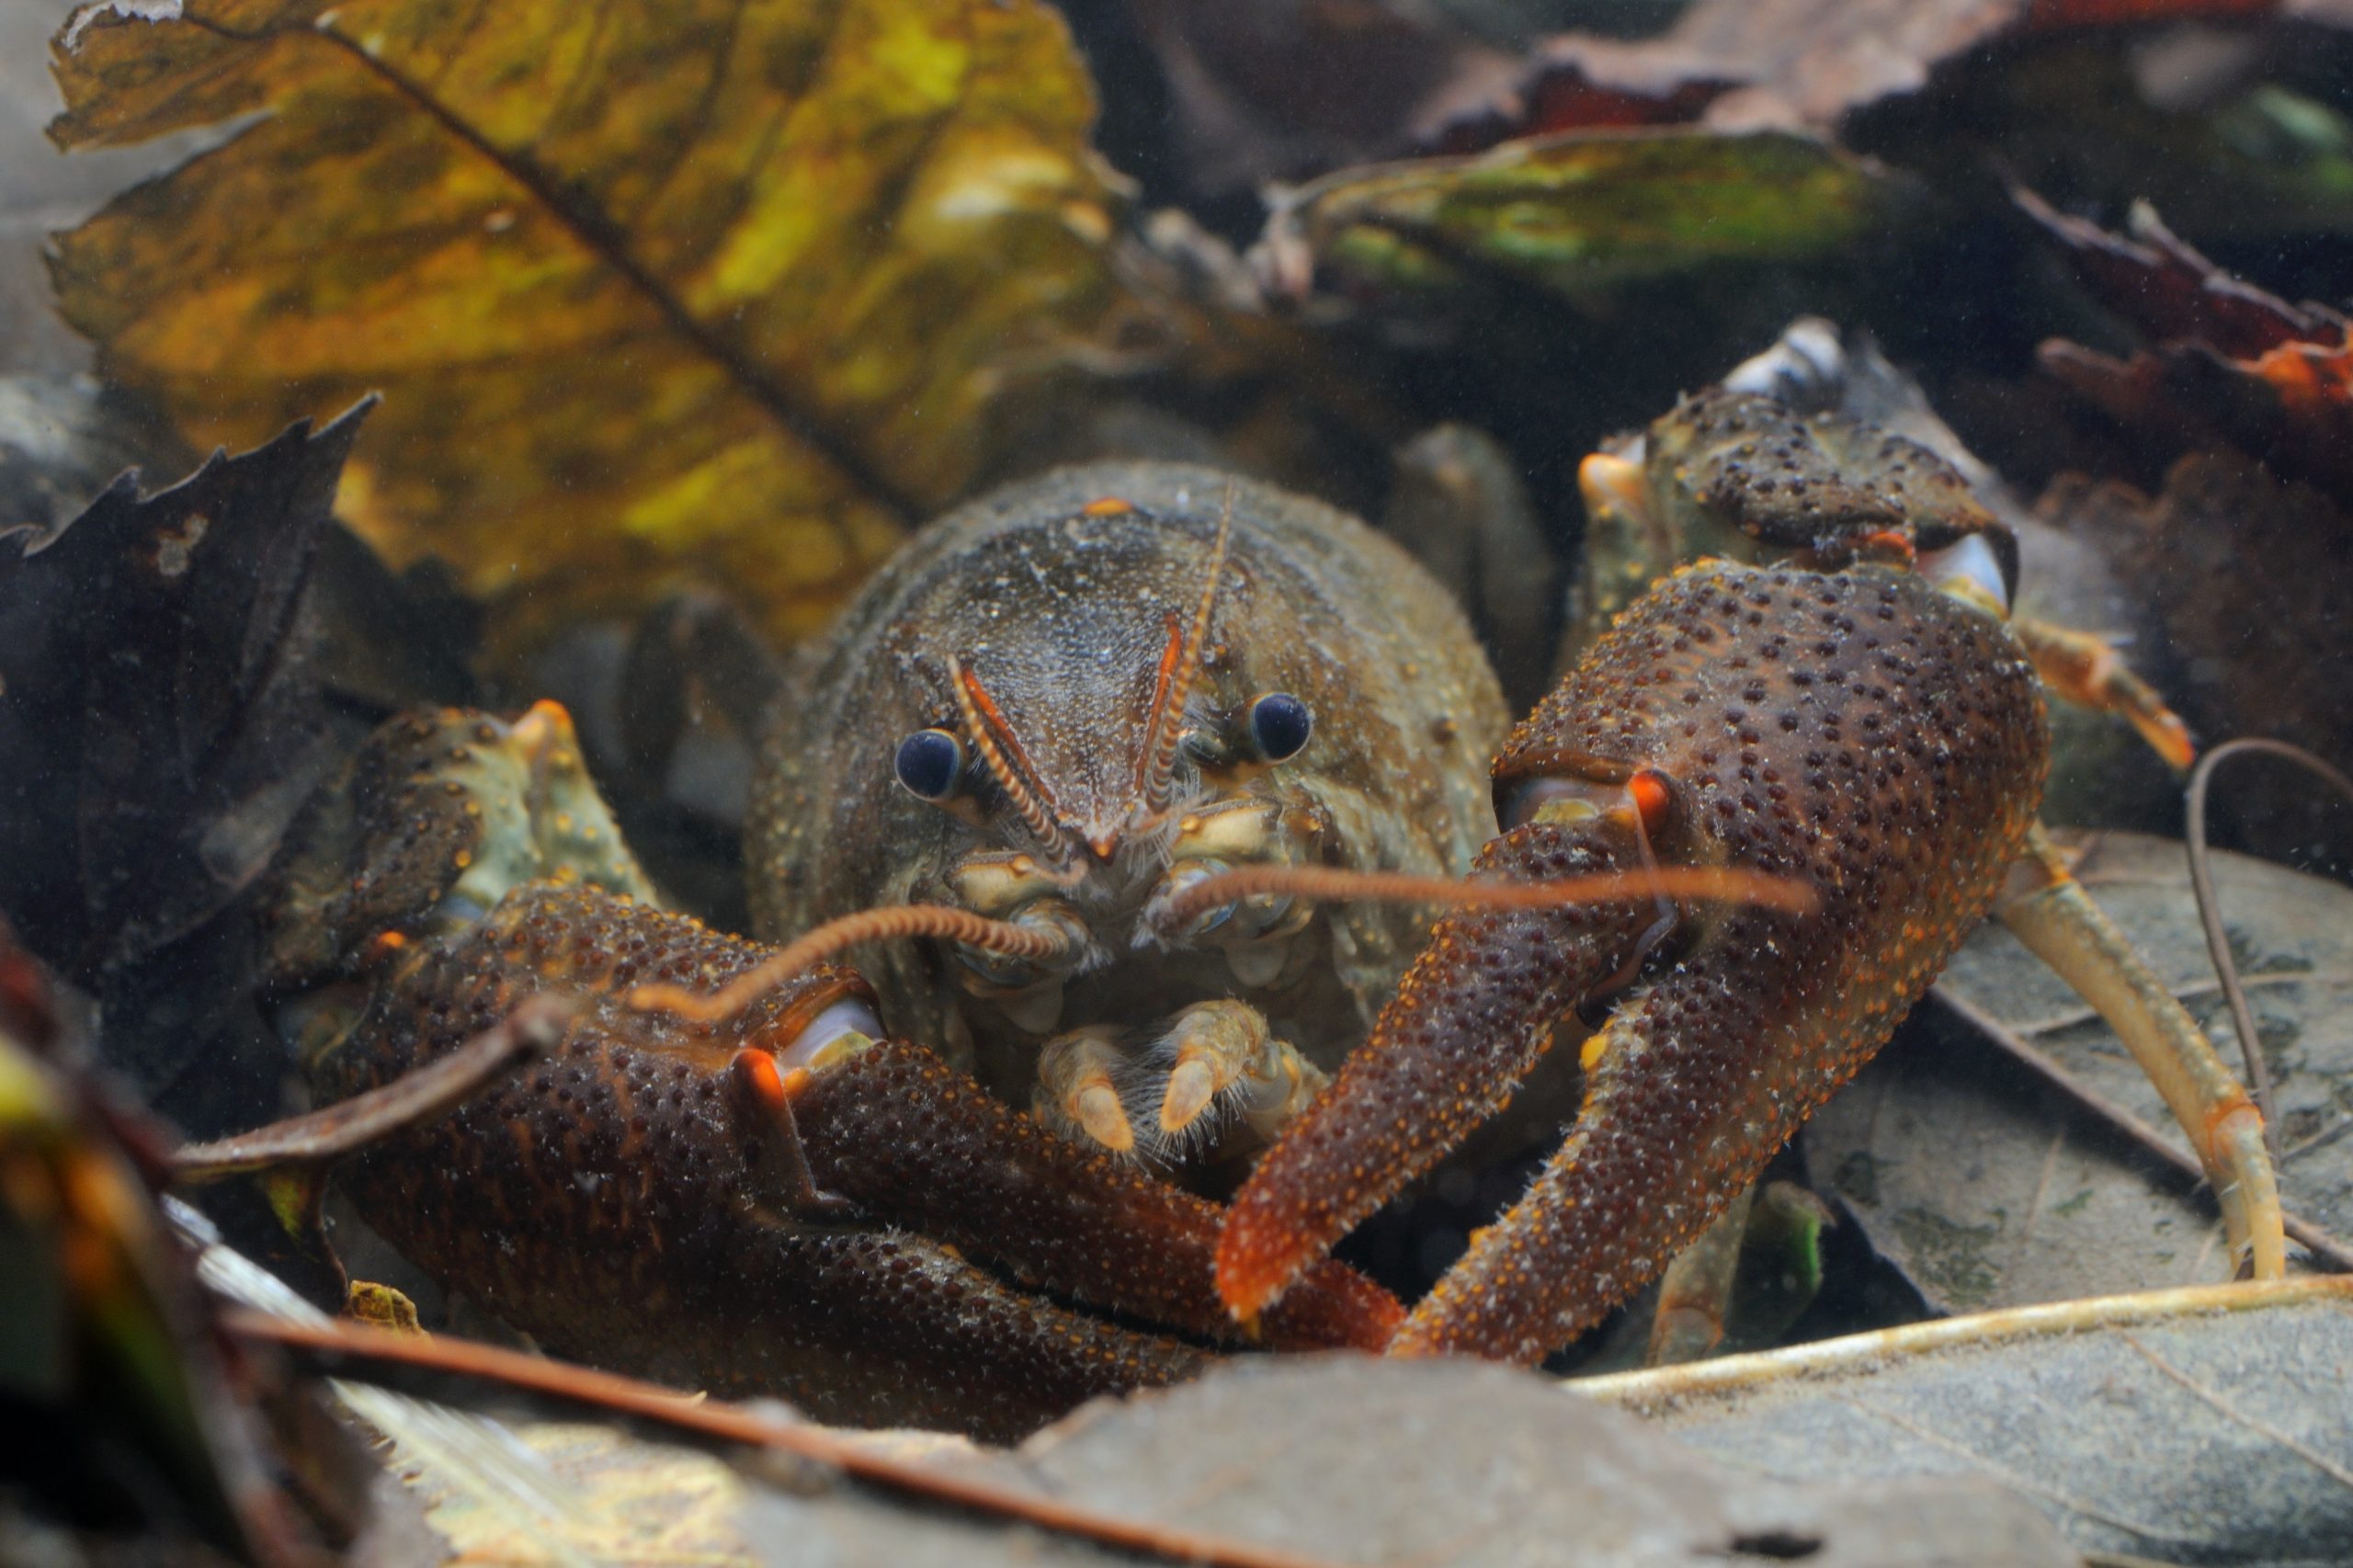 No Noah’s Ark for White-clawed Crayfish